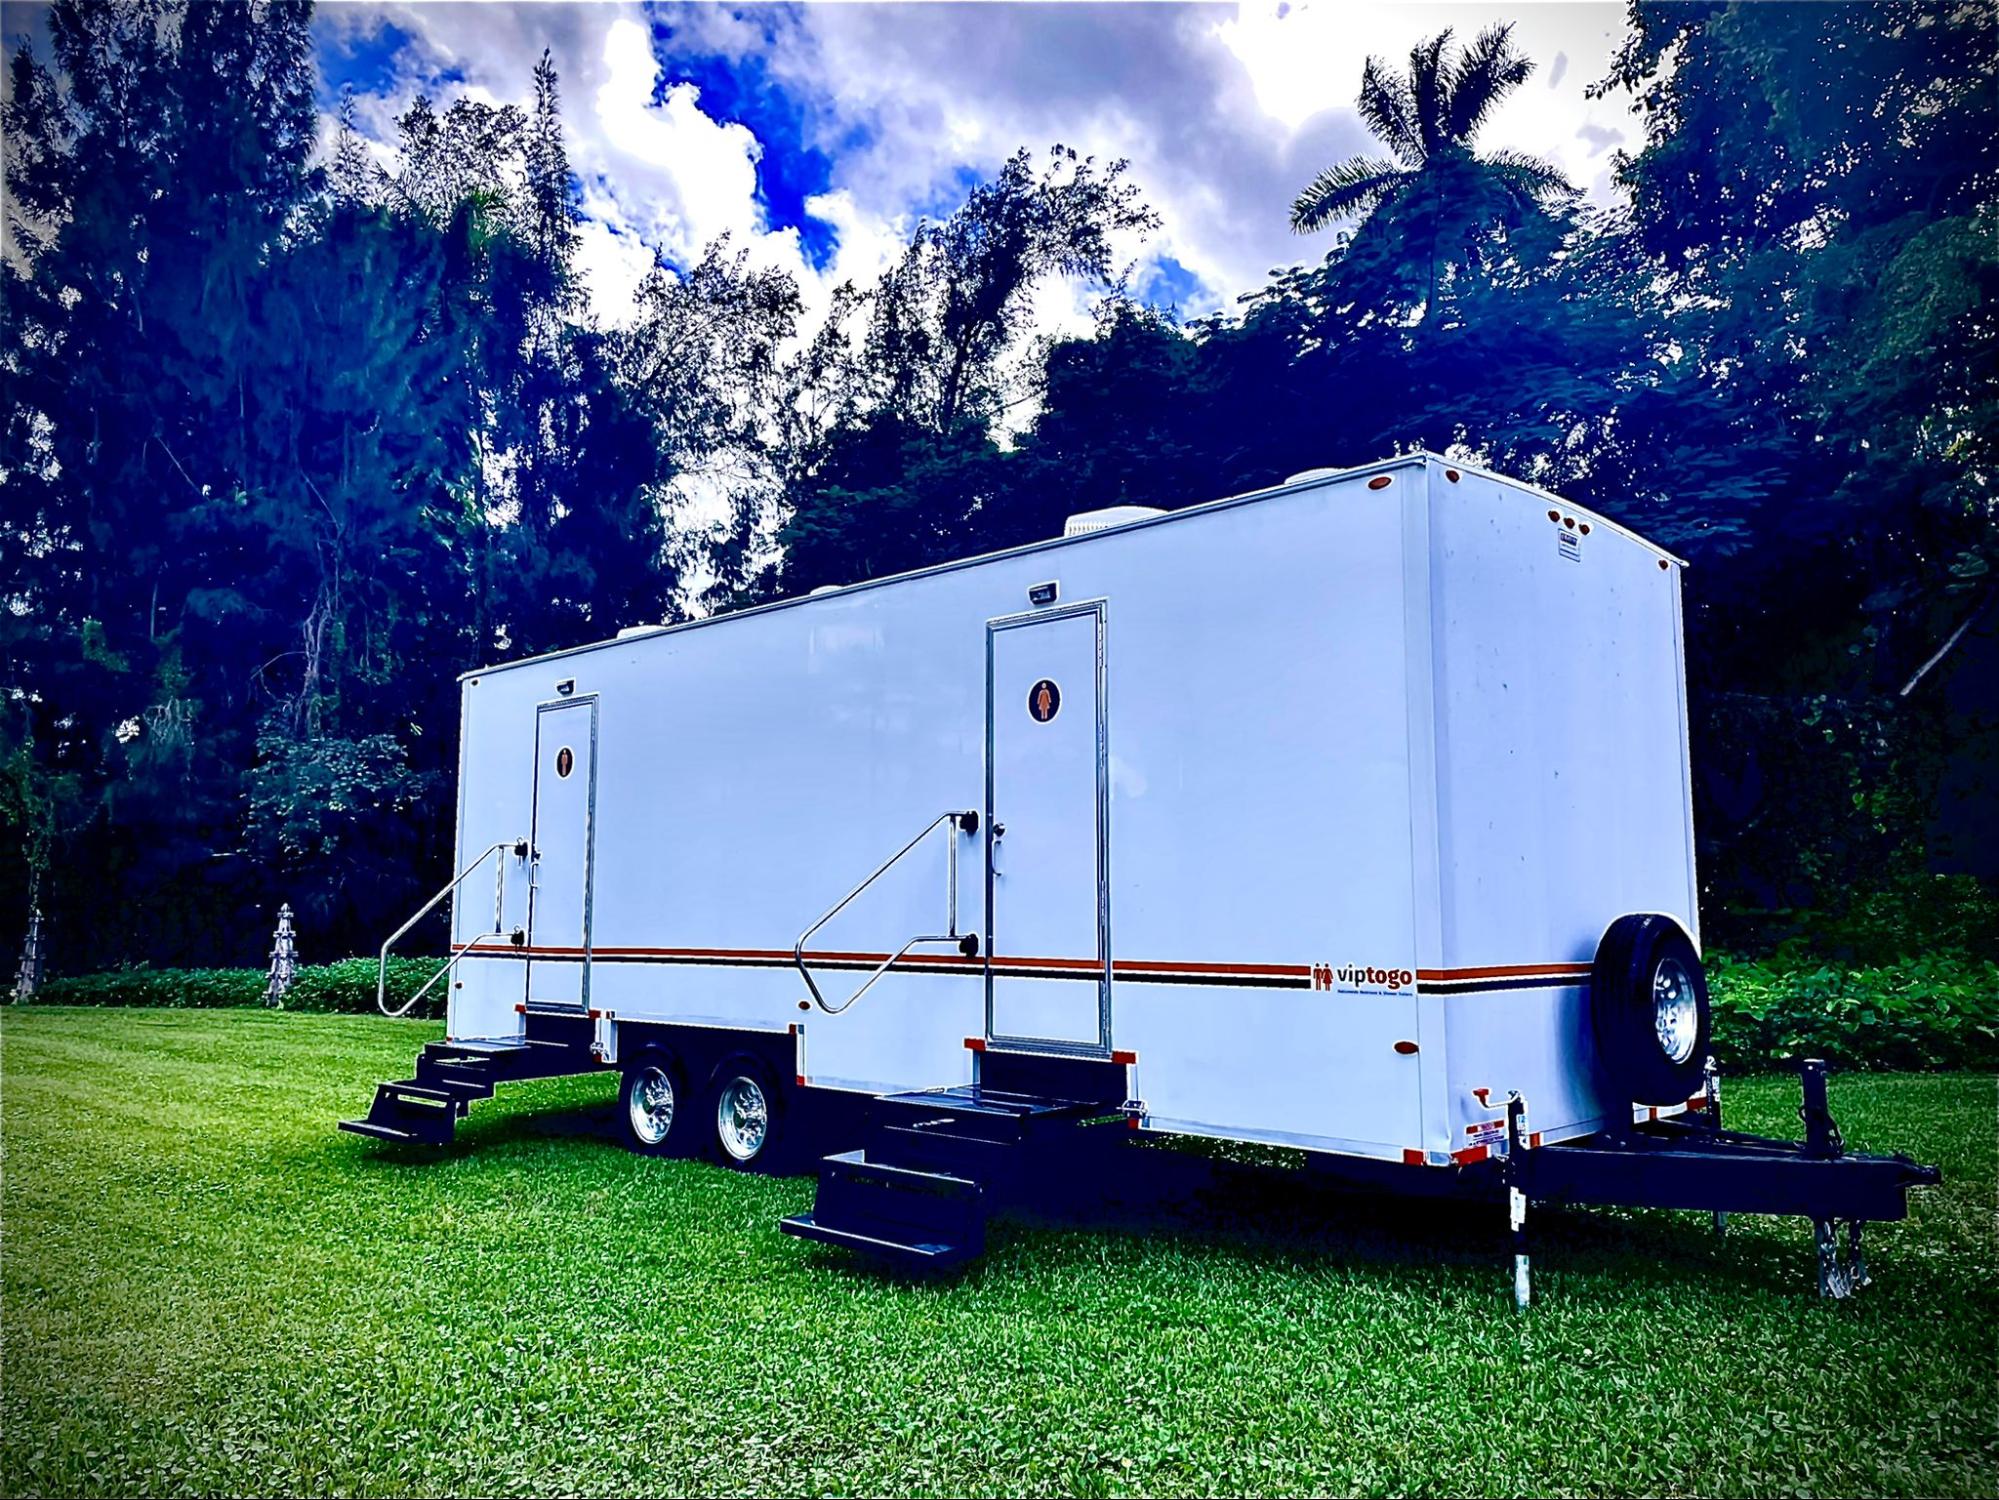 VIP To Go’s portable restroom trailers for weddings